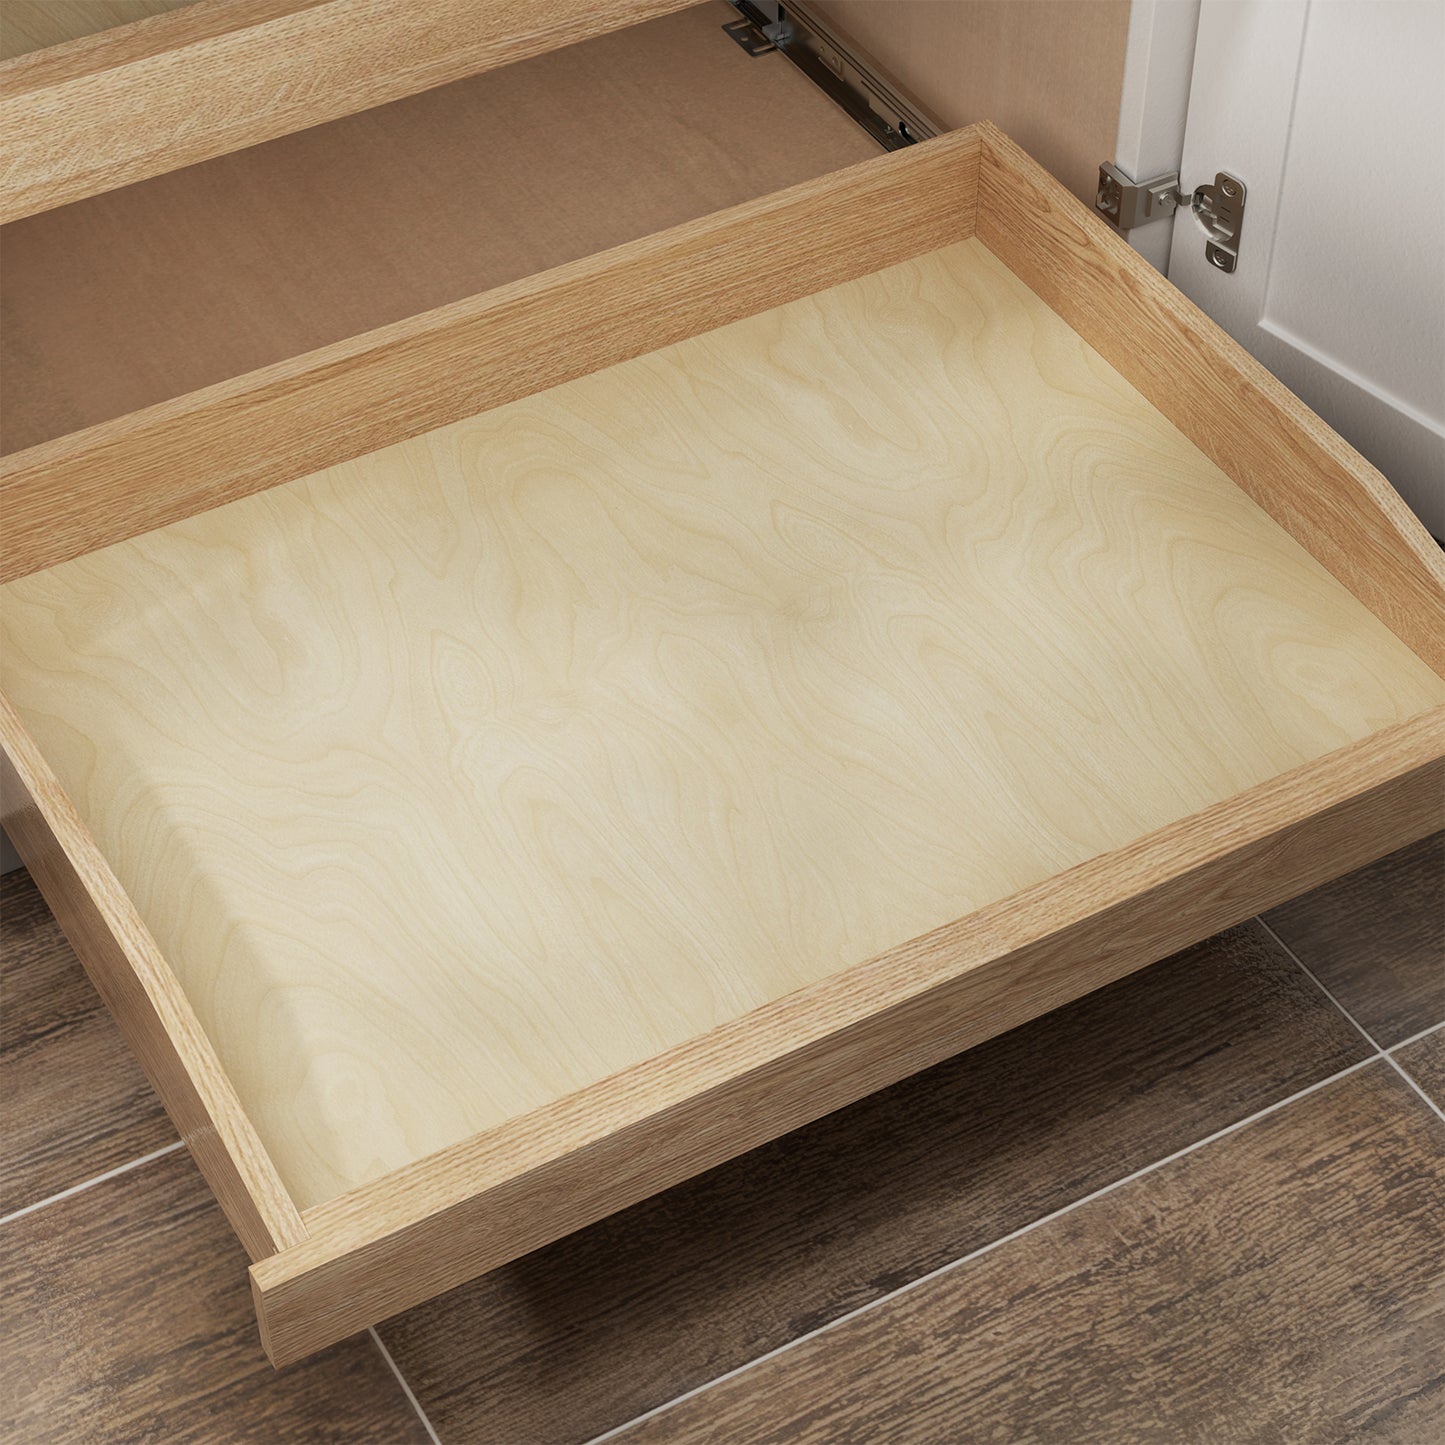 Wood Cabinet Pull Out Drawer with Soft Close